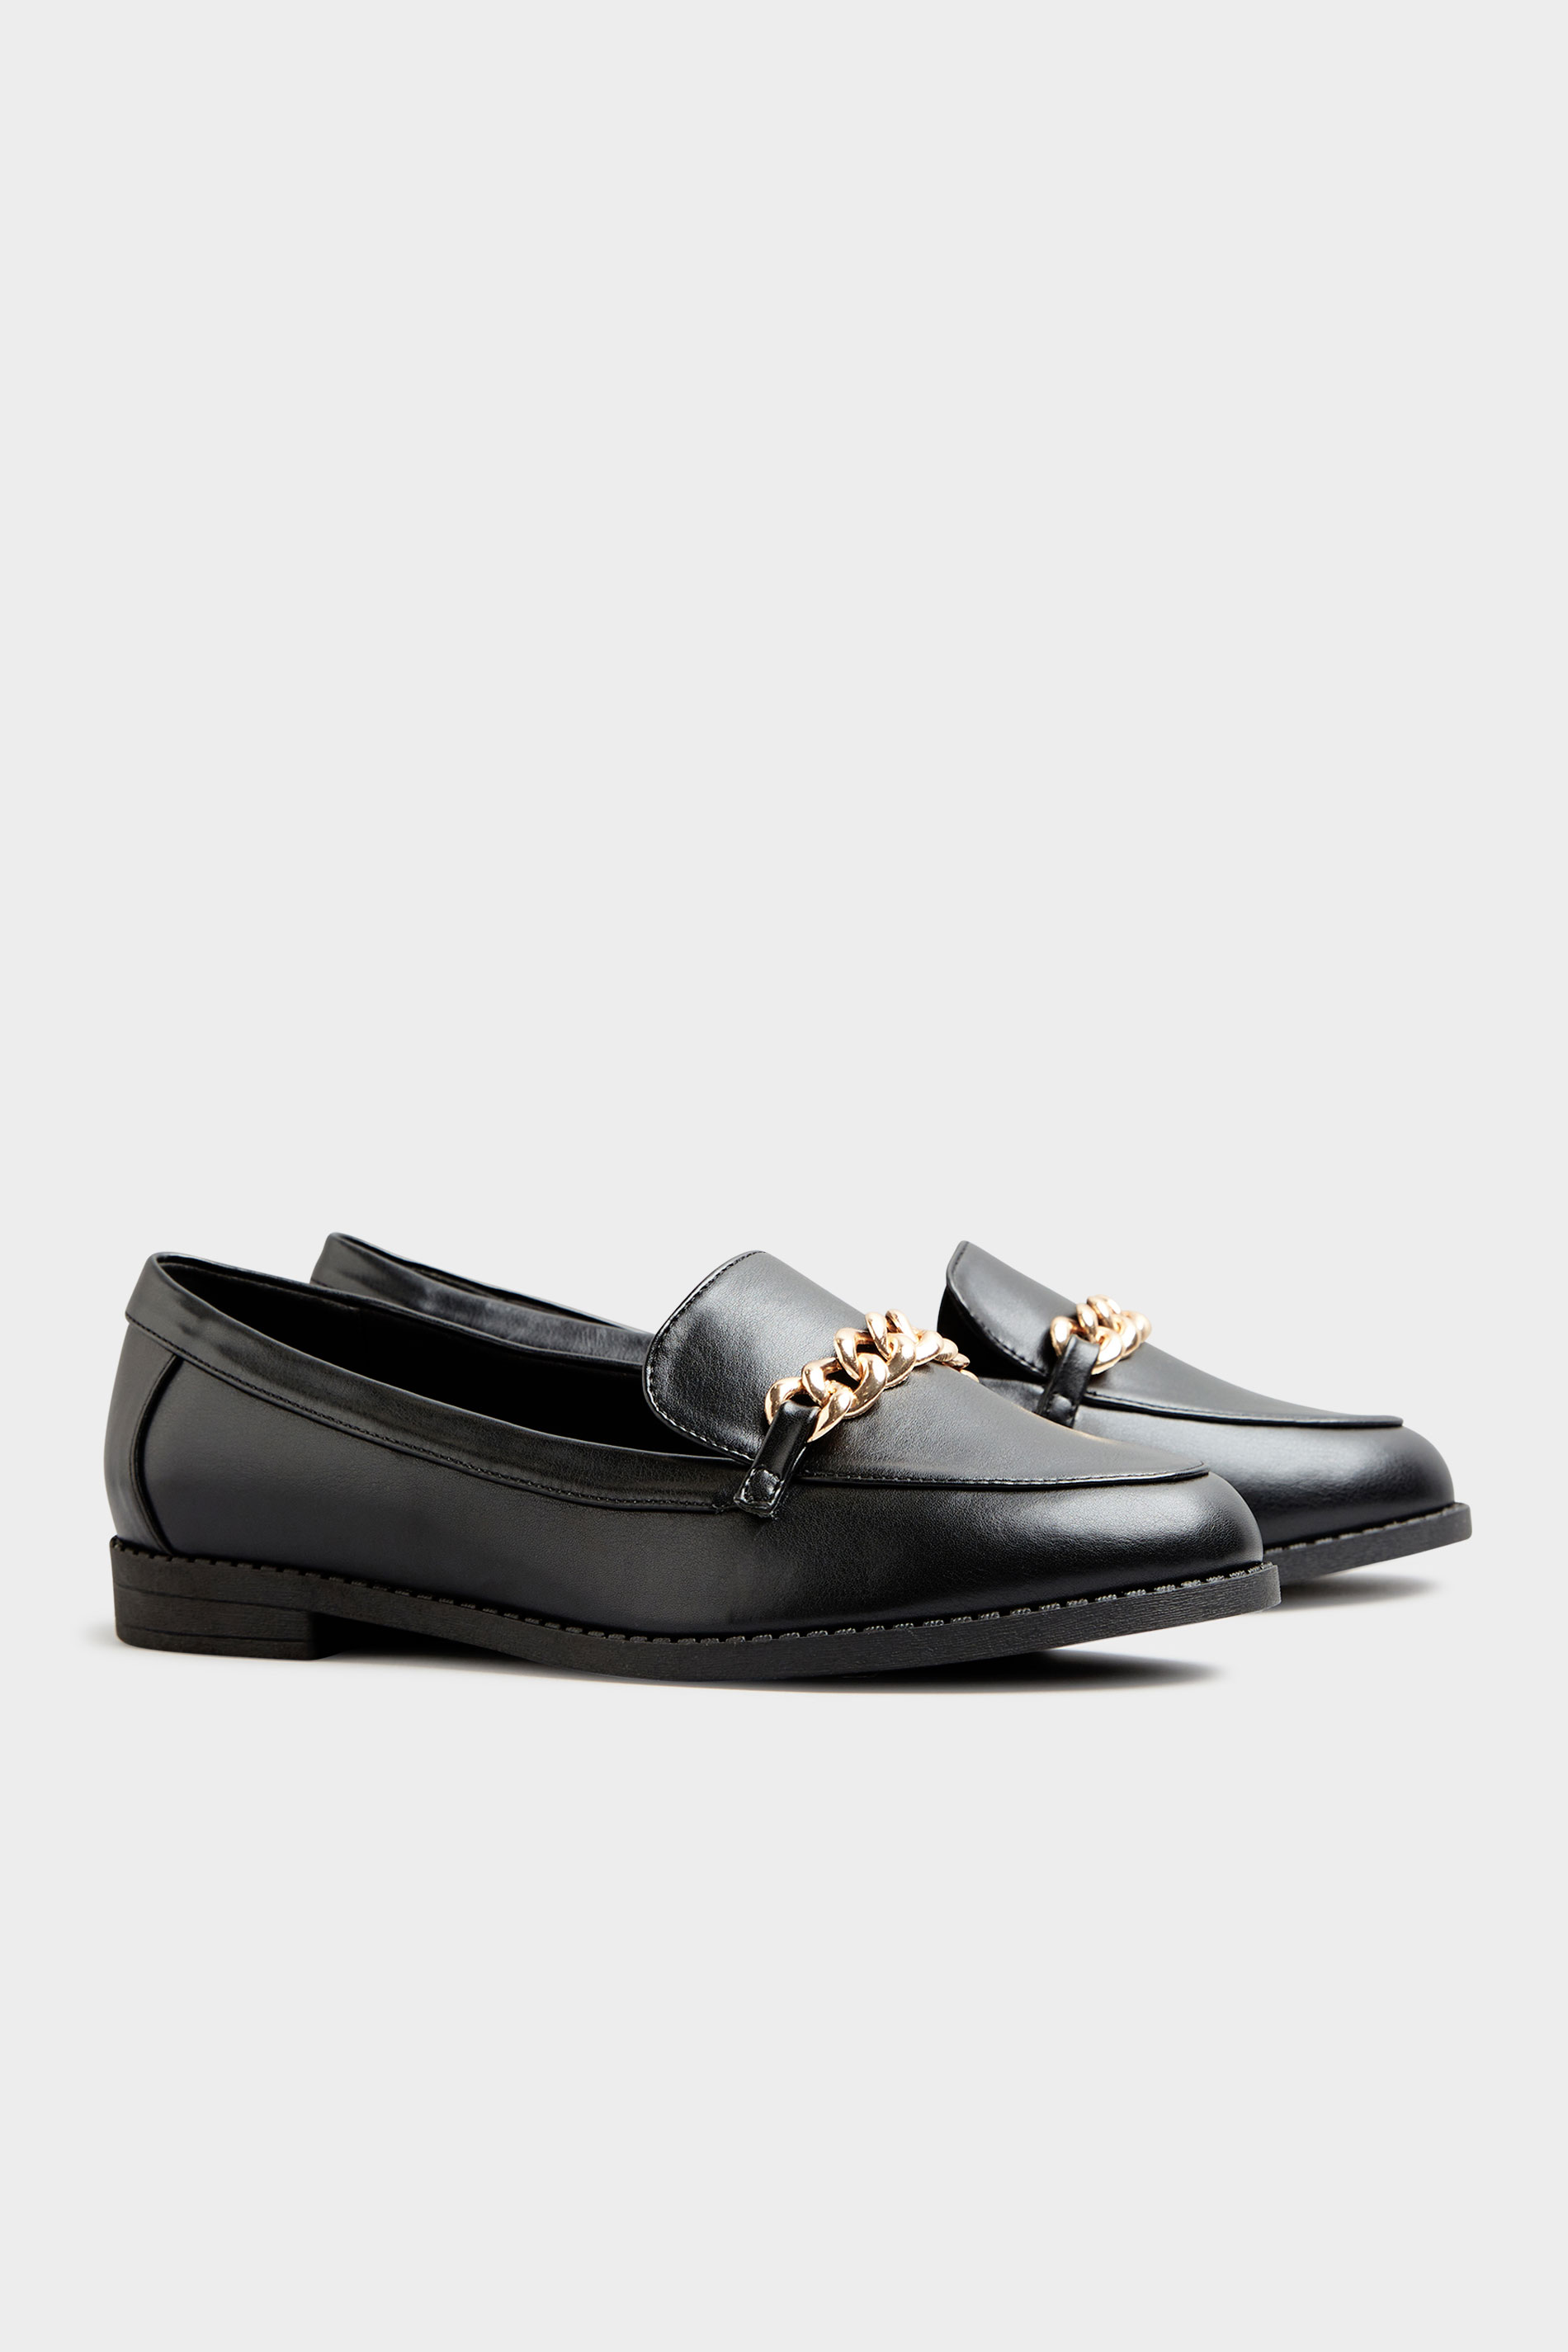 Black Chain Loafers In Extra Wide EEE Fit_C.jpg